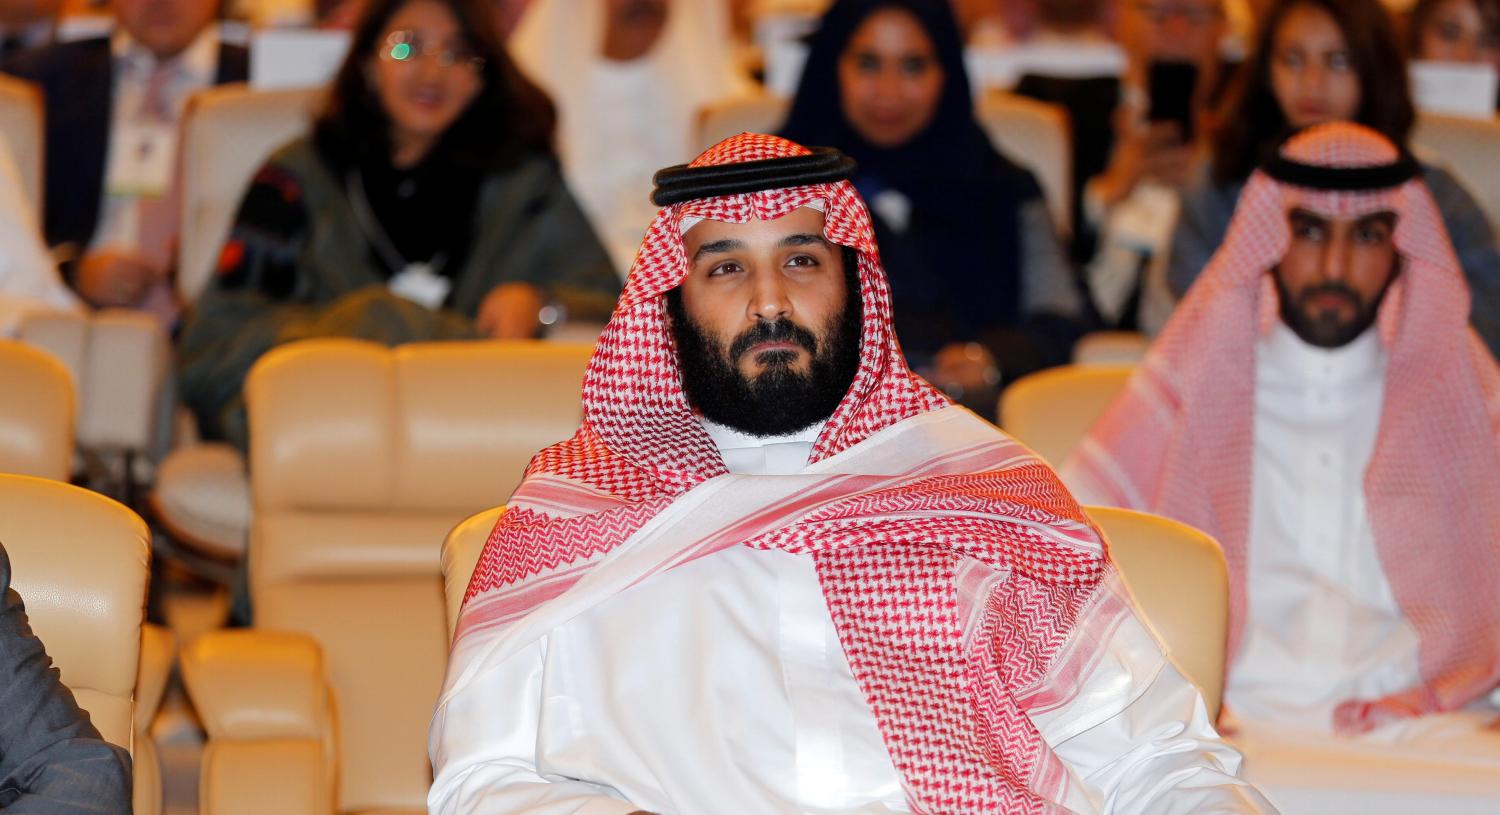 Saudi Crown Prince Mohammed bin Salman, attends the Future Investment Initiative conference in Riyadh, Saudi Arabia October 24, 2017. REUTERS/Hamad I Mohammed - RC14B99CF4A0